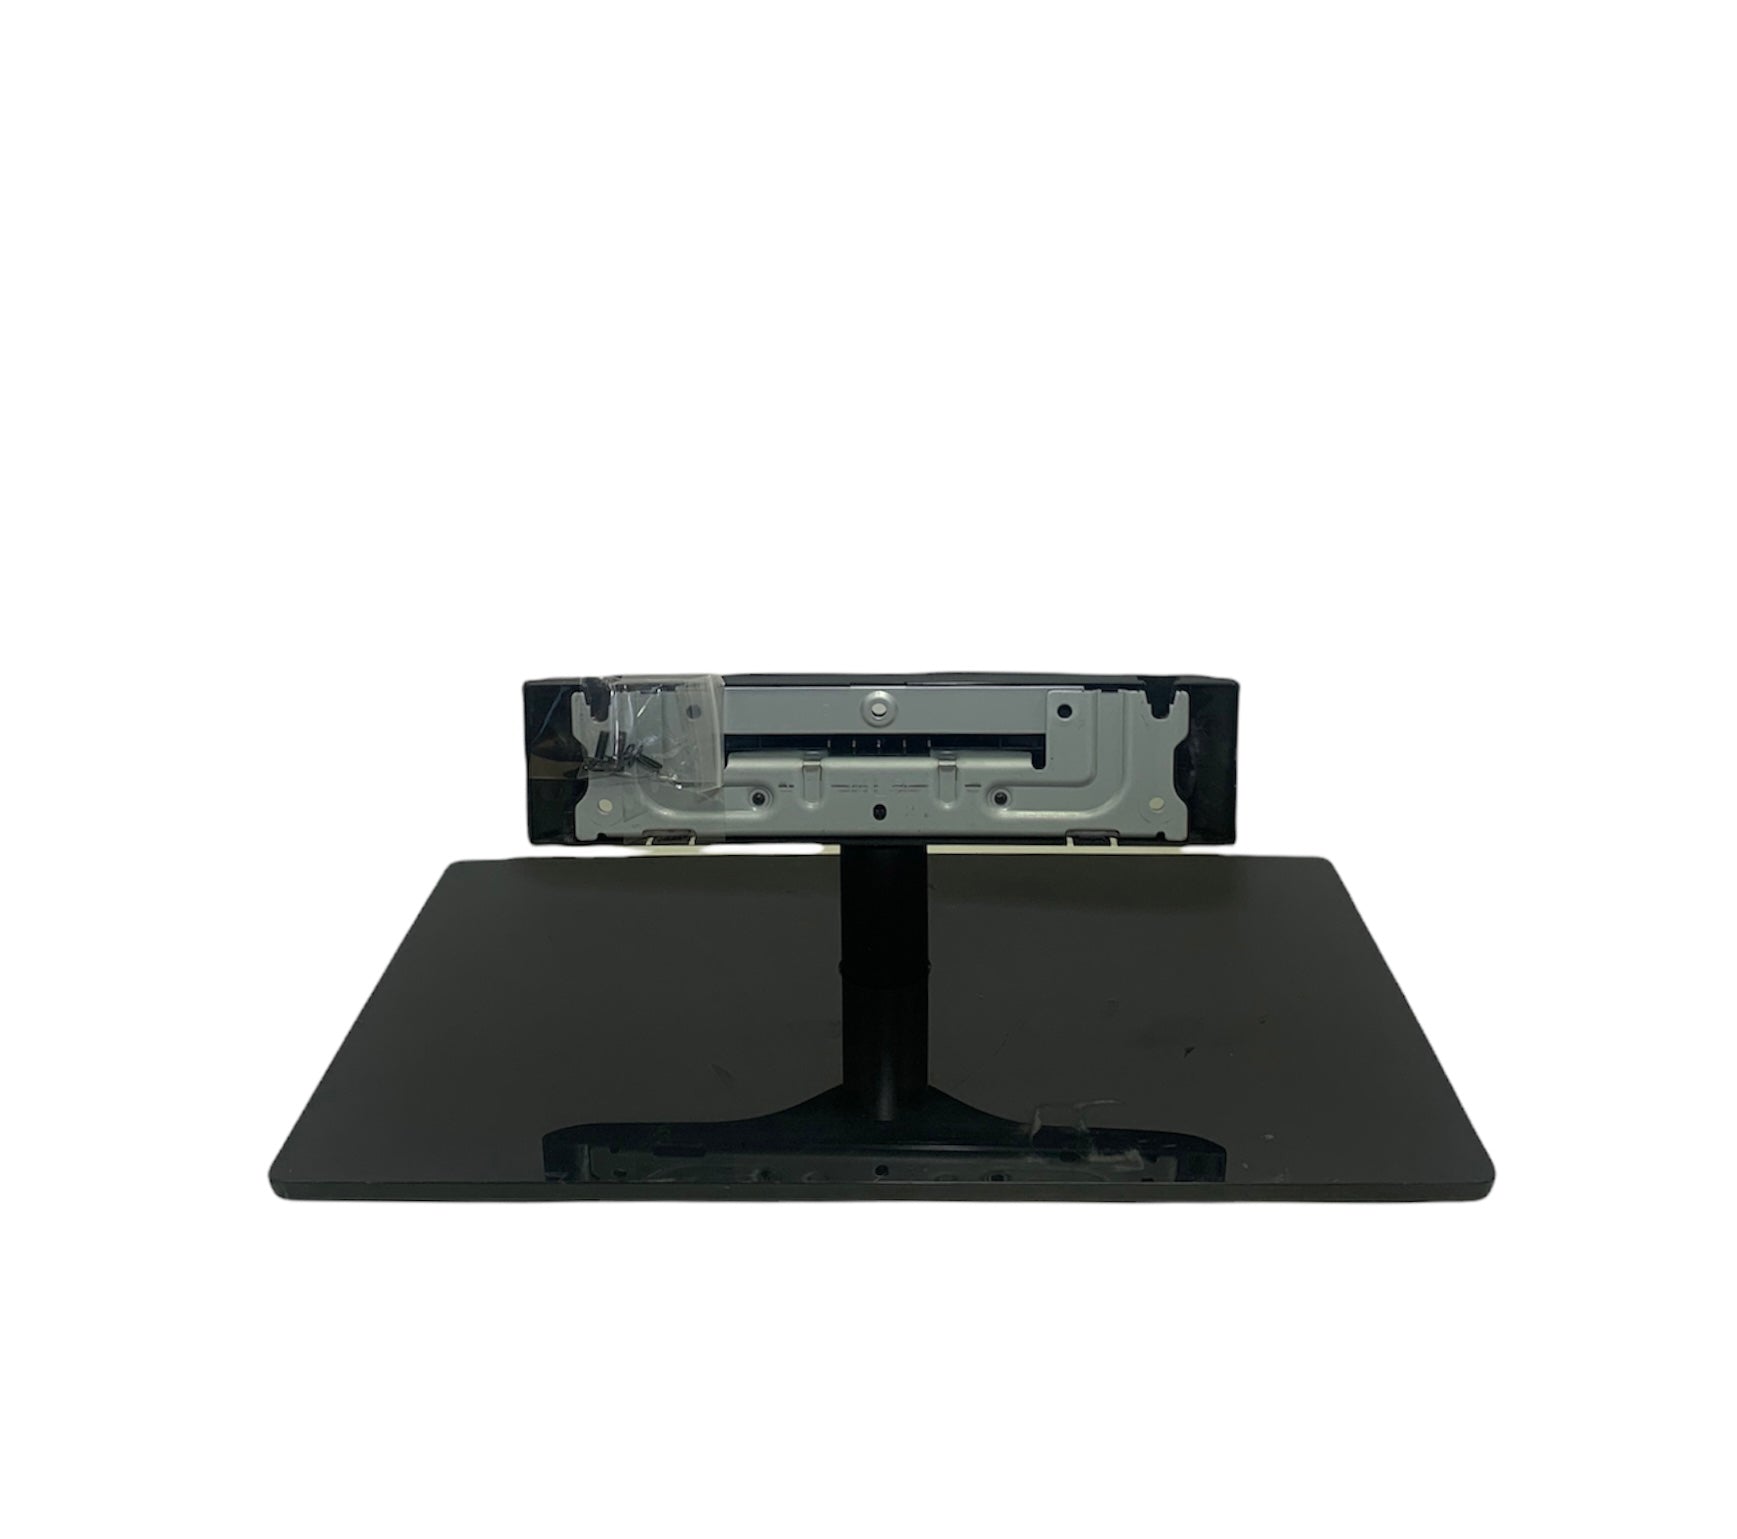 Sony KDL-55EX723 TV Stand/Base